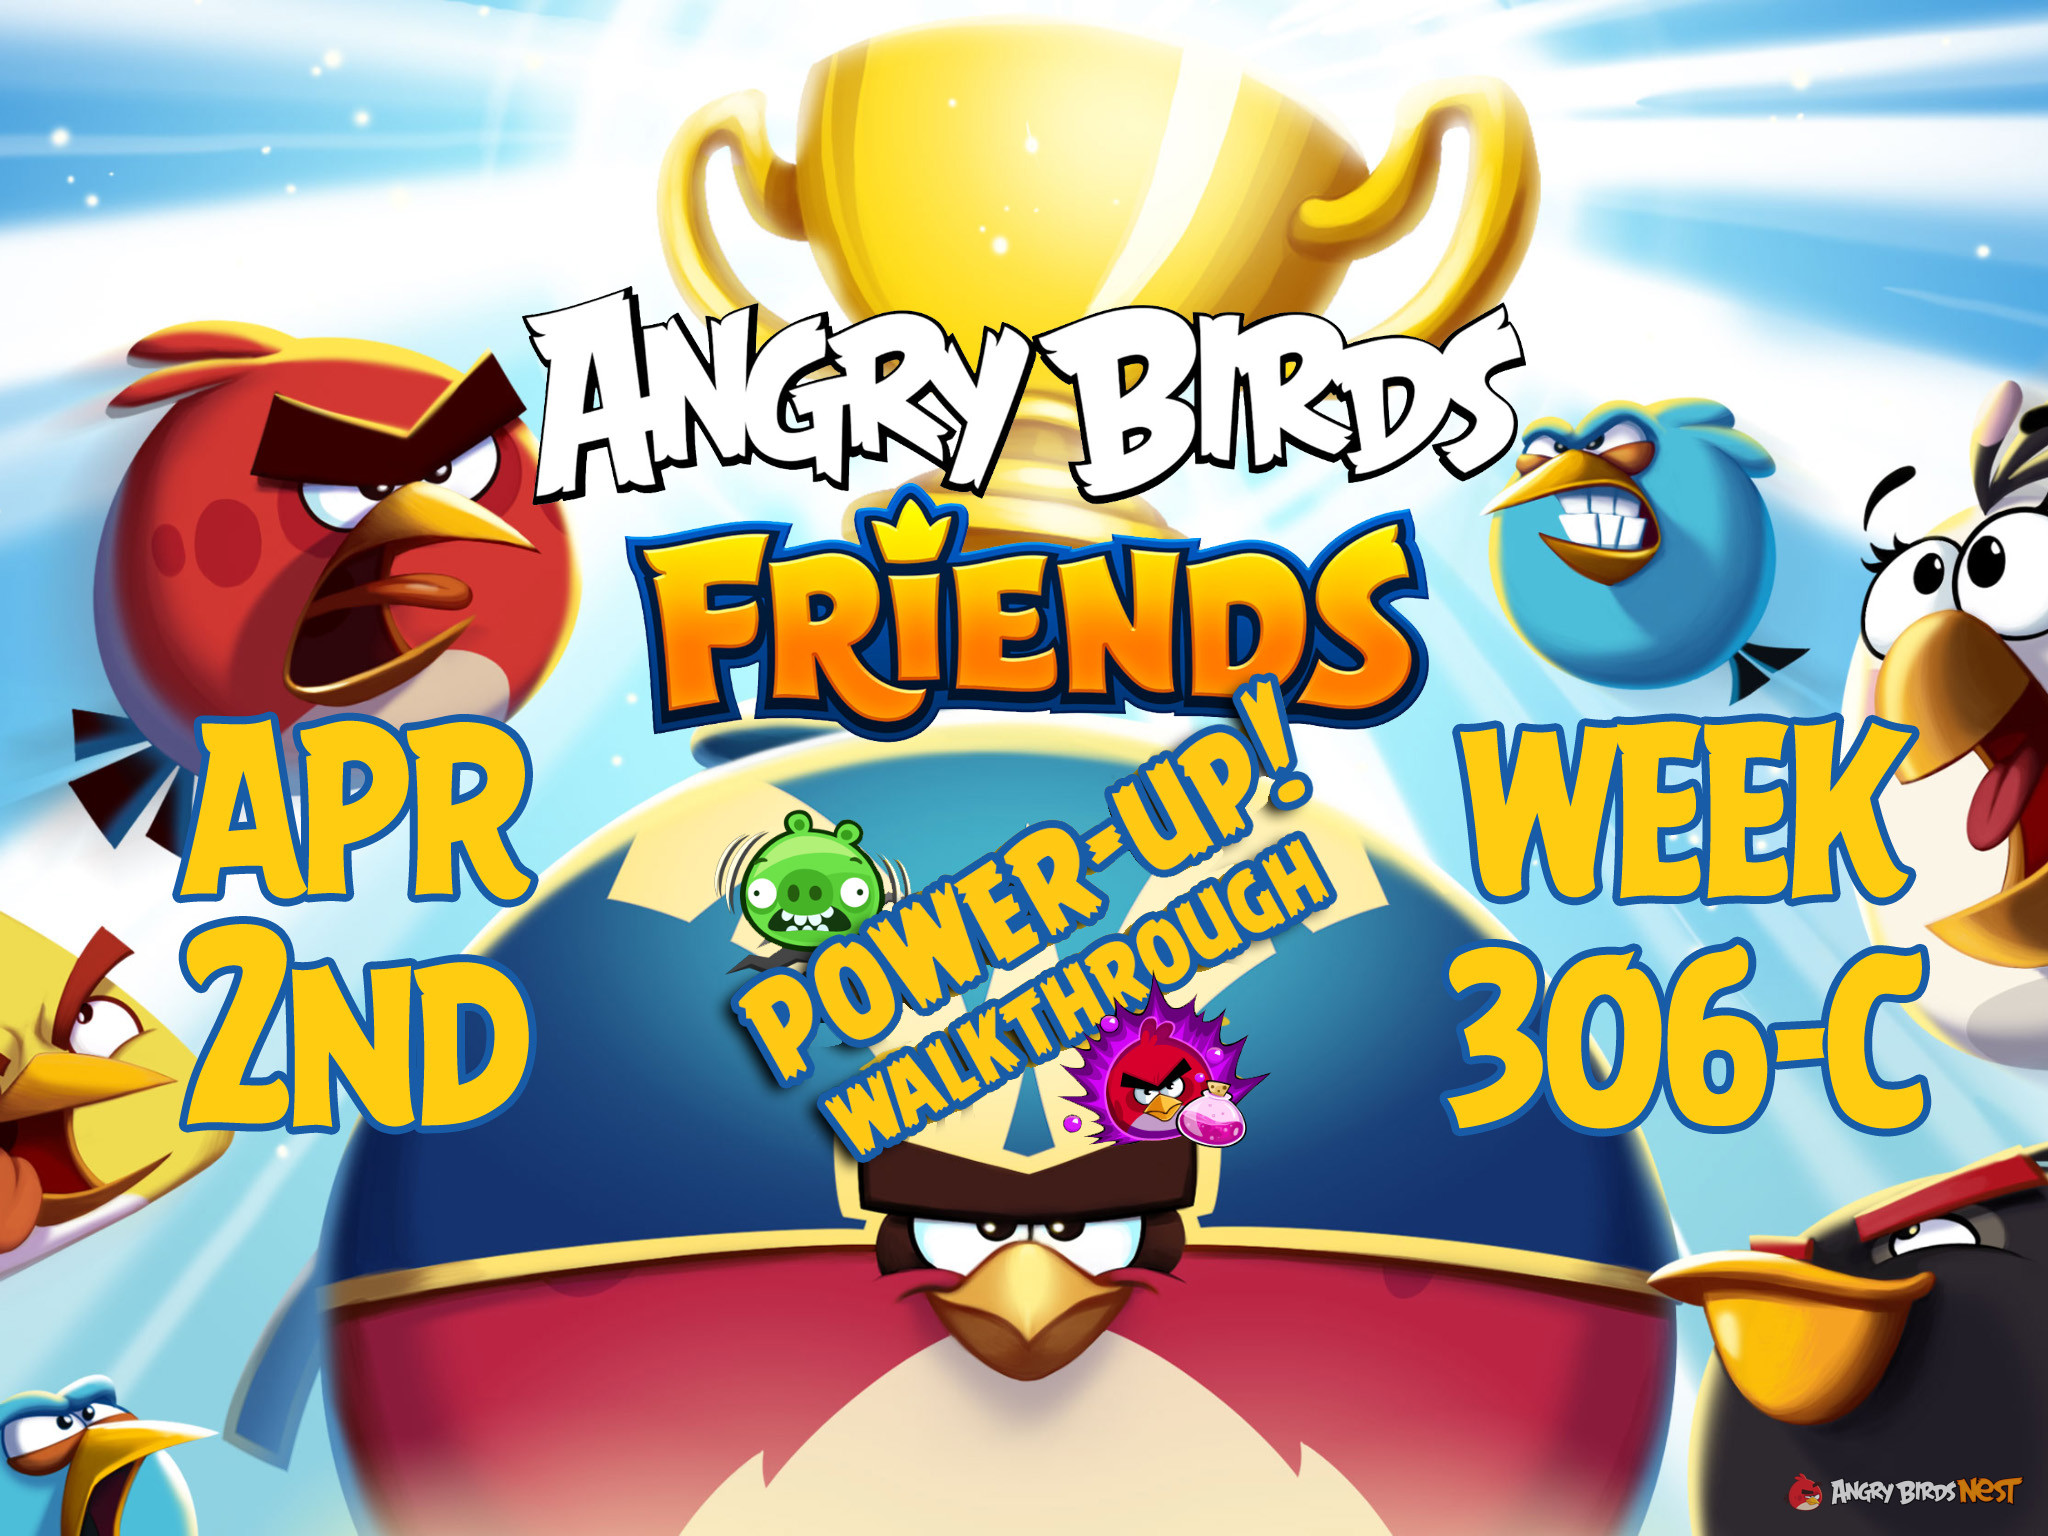 Angry Birds Friends Tournament Week 306-C Feature Image PU